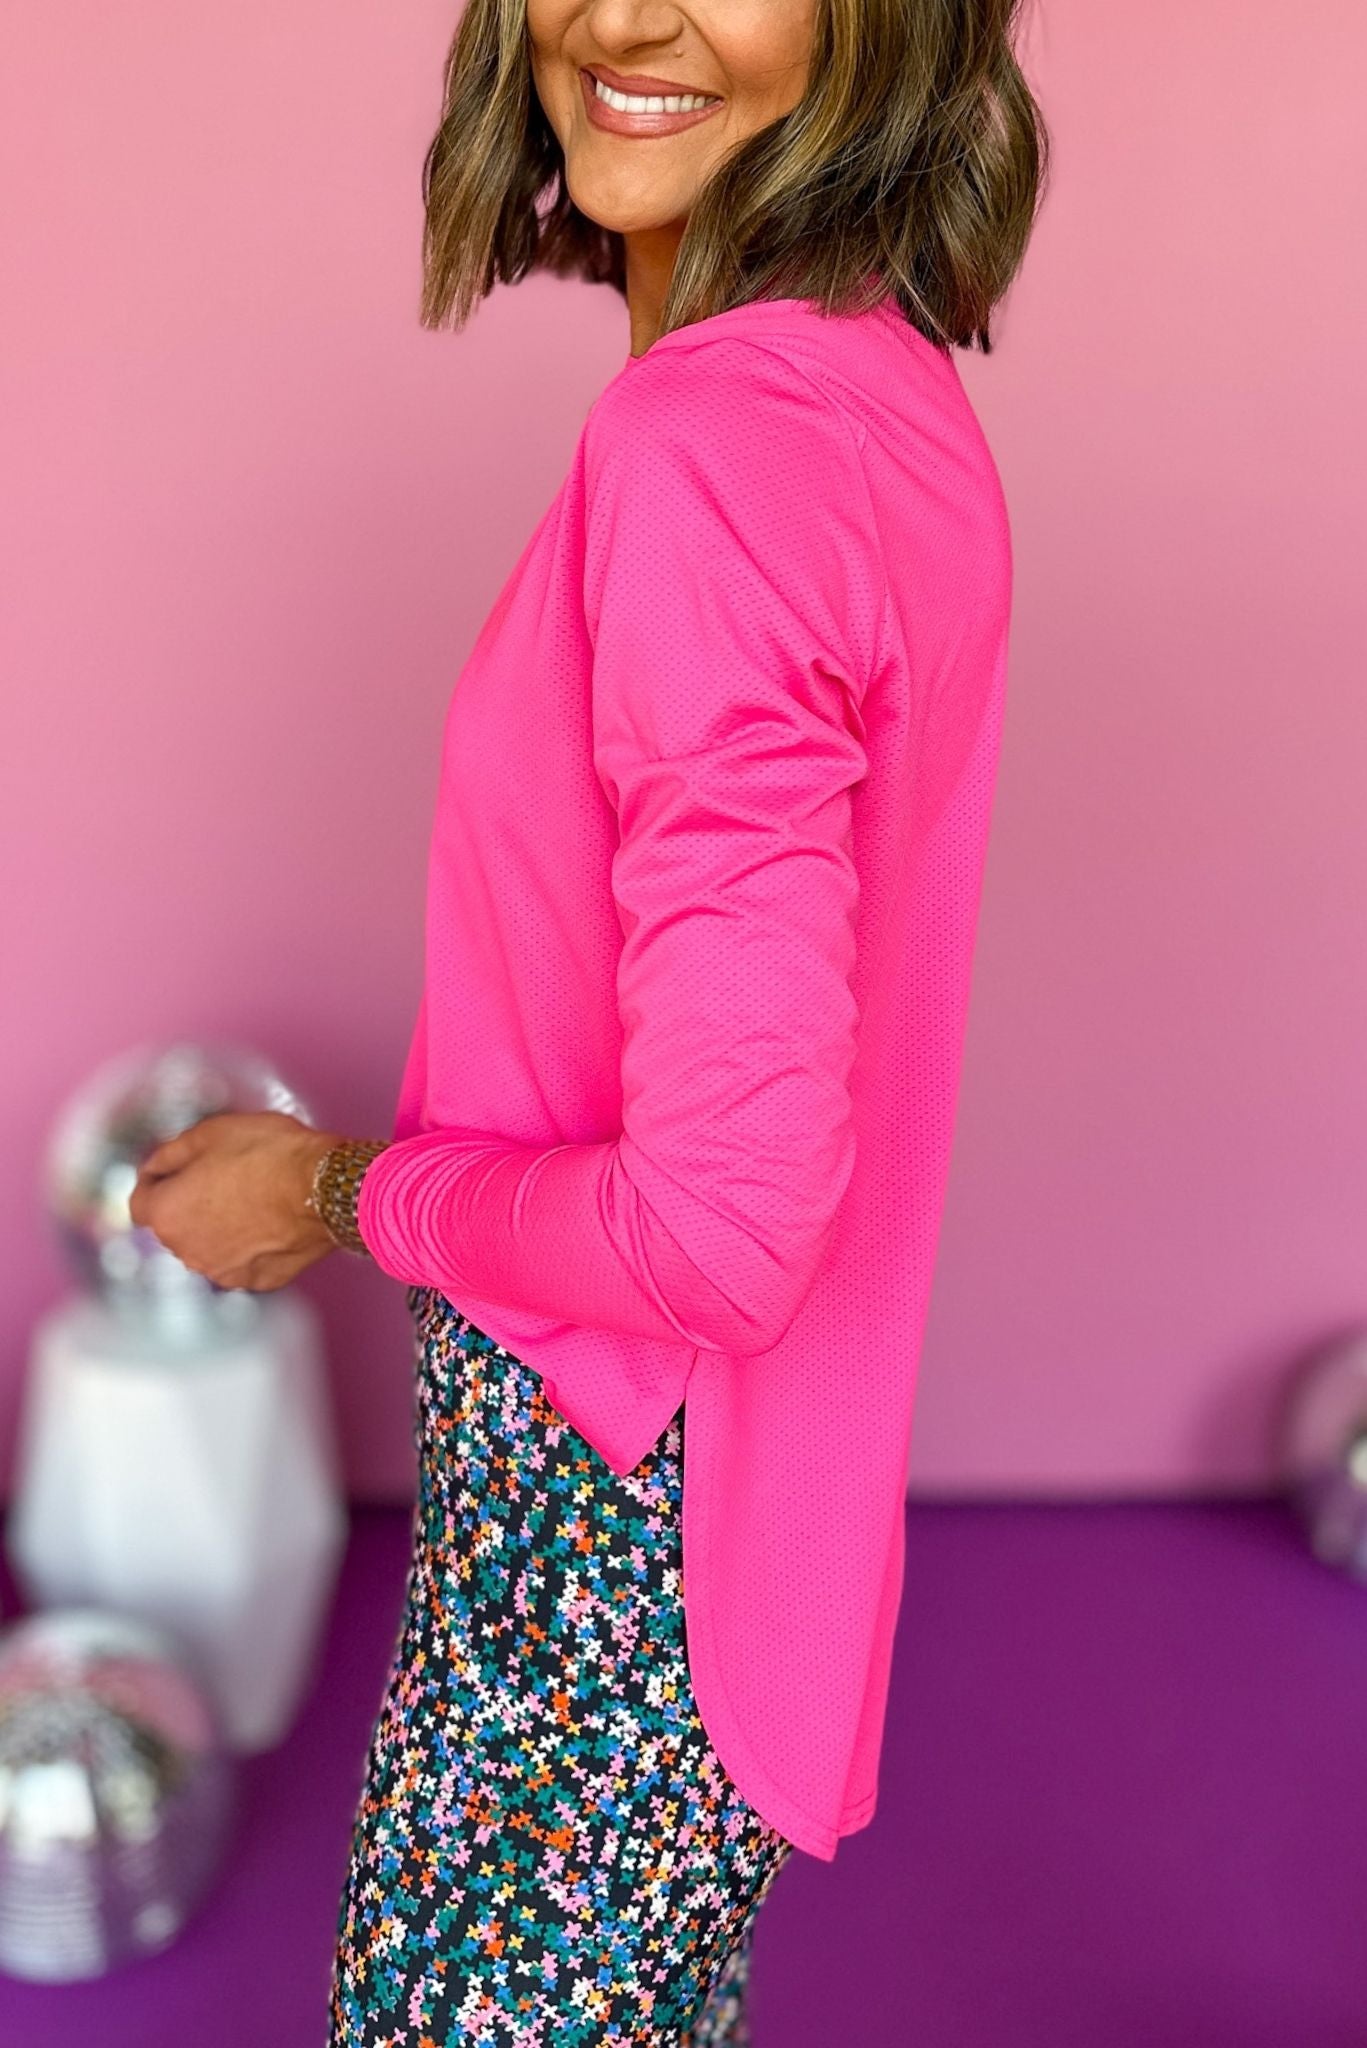 SSYS Hot Pink Long Sleeve Active Top, elevated style, elevated top, elevated athleisure, must have top, must have athleisure, mom style, athletic style, ssys the label, shop style your senses by mallory fitzsimmons